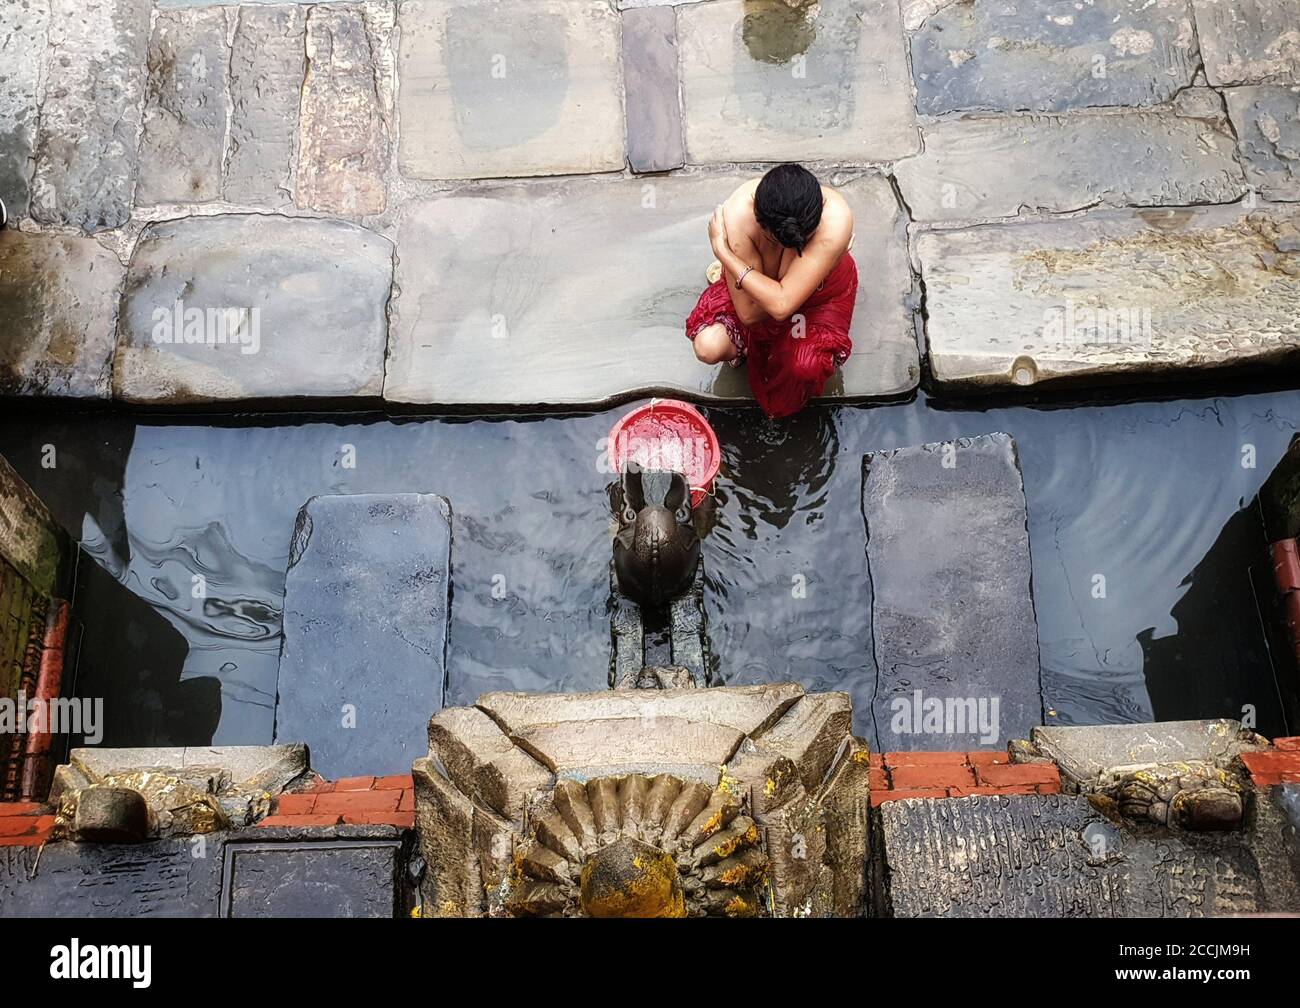 Kathmandu, Nepal. 23rd Aug, 2020. A woman bathsÂ atÂ a stone tap during the Rishi Panchami festival, as taking baths at riverÂ banks was prohibited by government due to concern of COVID-19 outbreak in Kathmandu, Nepal on August 23, 2020. Rishi Panchami festival marks the end of the three-day Teej festival when women worship Sapta Rishi (Seven Saints), take holy bathsÂ atÂ riverÂ banks and pray for health for their husband while unmarried women wish for a handsome husband and happy conjugal lives. Credit: Sunil Sharma/ZUMA Wire/Alamy Live News Stock Photo